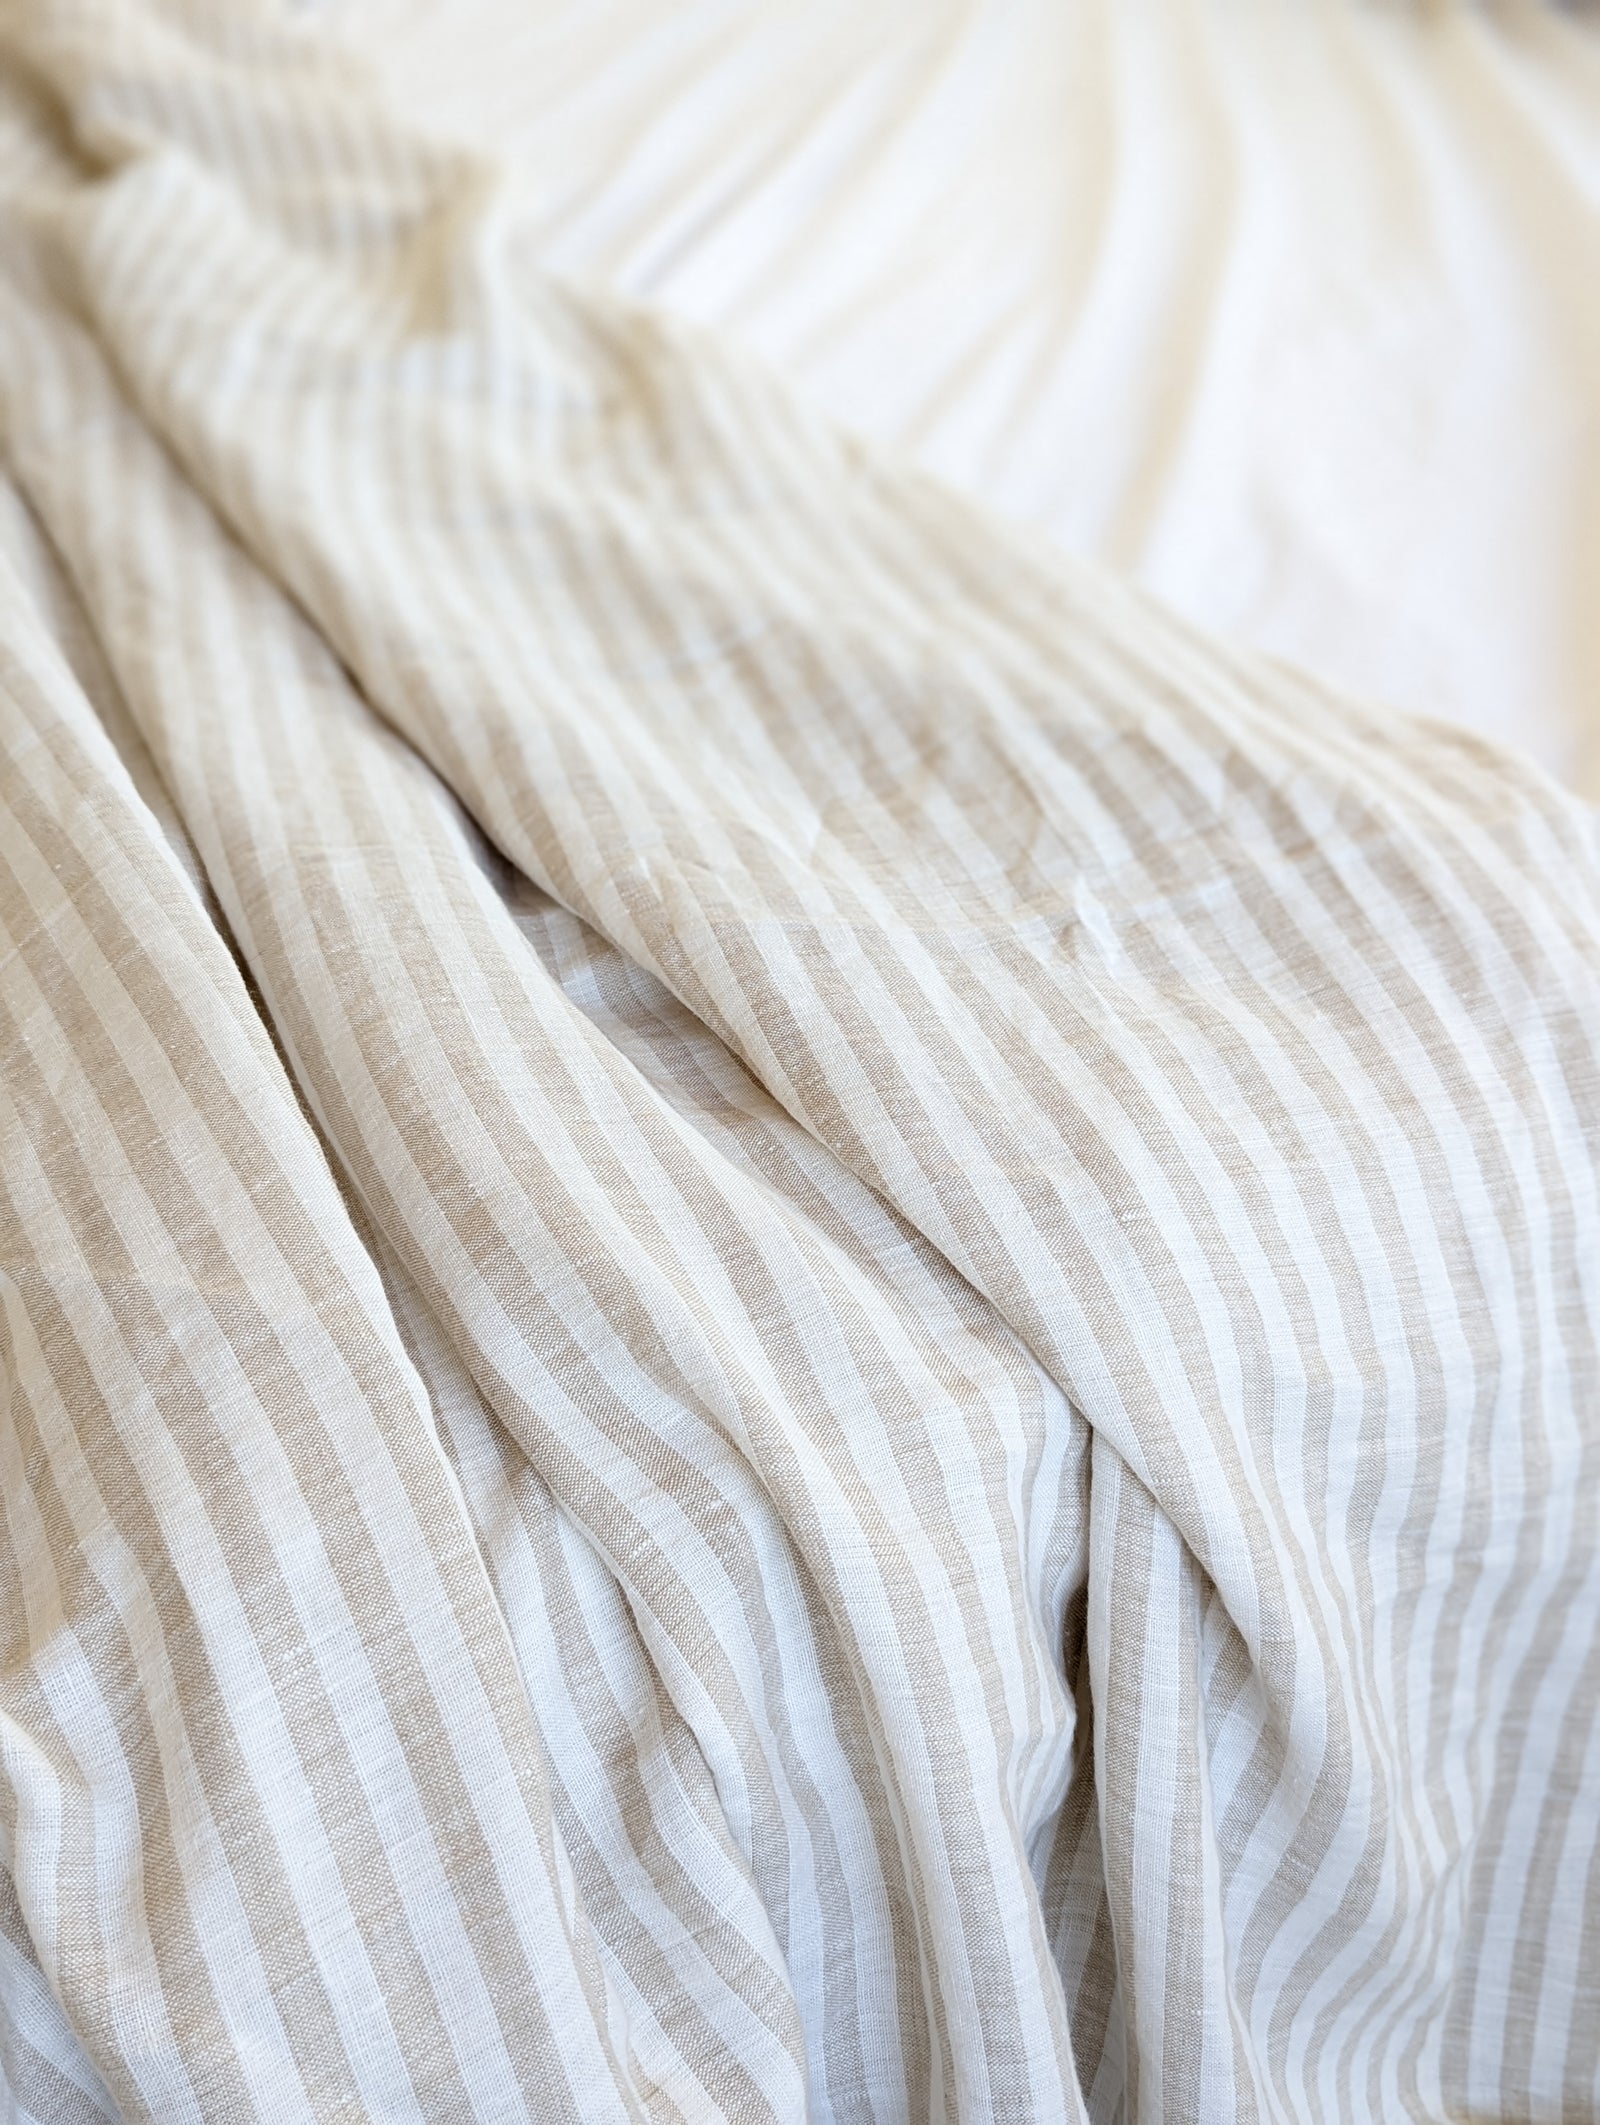 How Often You Should Be Washing Your Bed Sheets